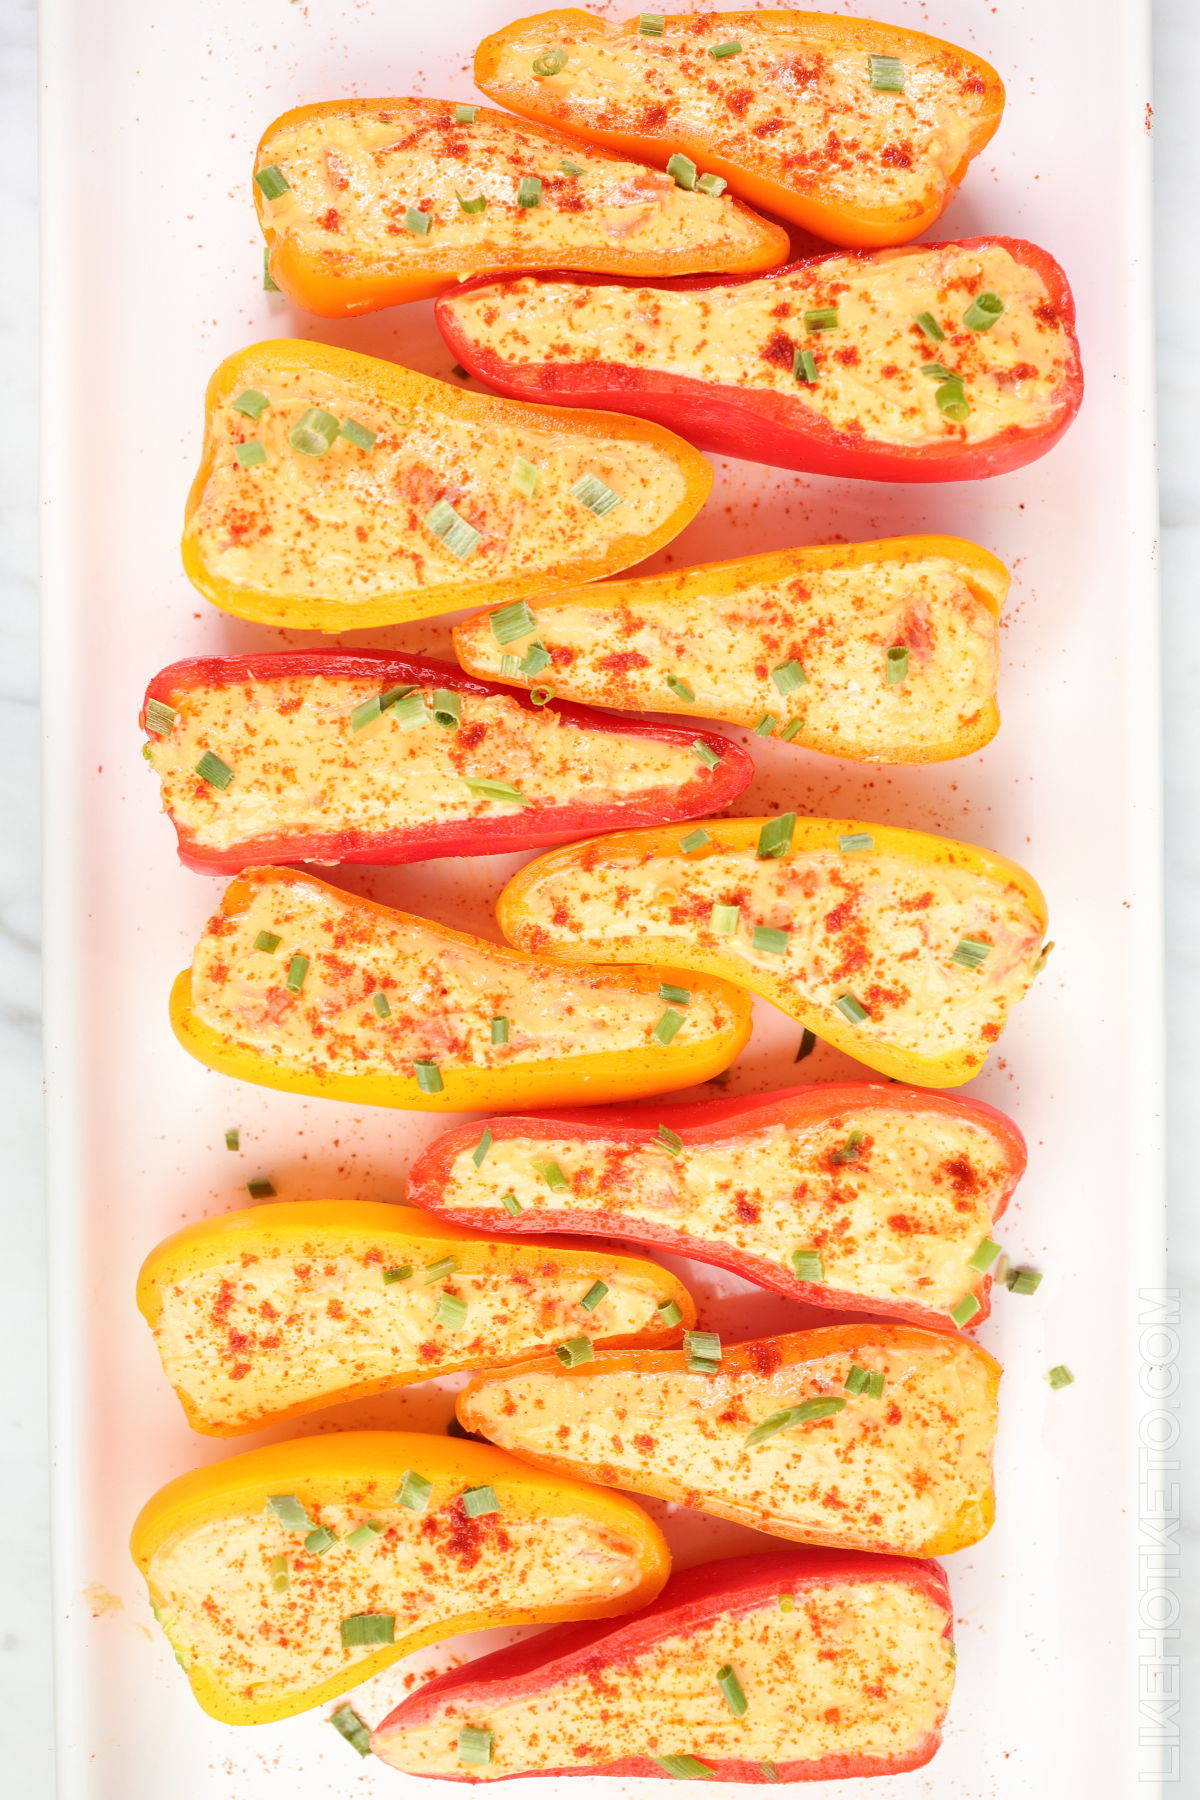 Raw mini bell peppers stuffed with cream cheese mix, garnished with spring onions.